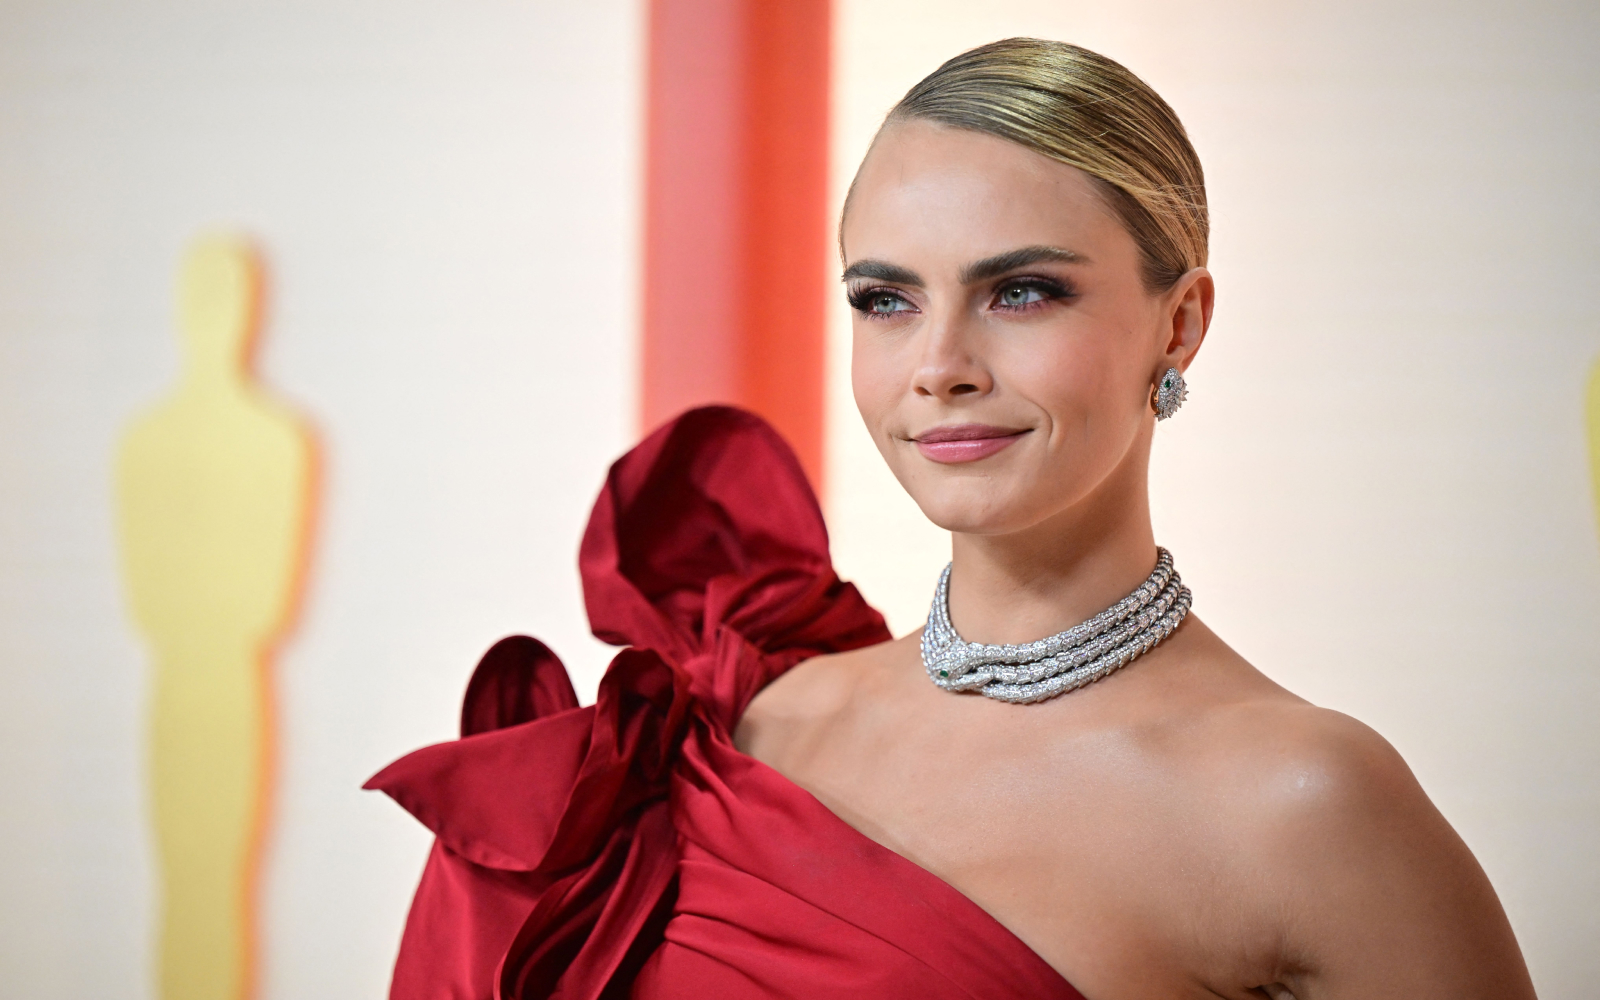 Cara Delevingne at the Academy Awards wearing a suite of Bulgari Serpenti jewels, including a 4.55-ct oval-shaped emerald ring